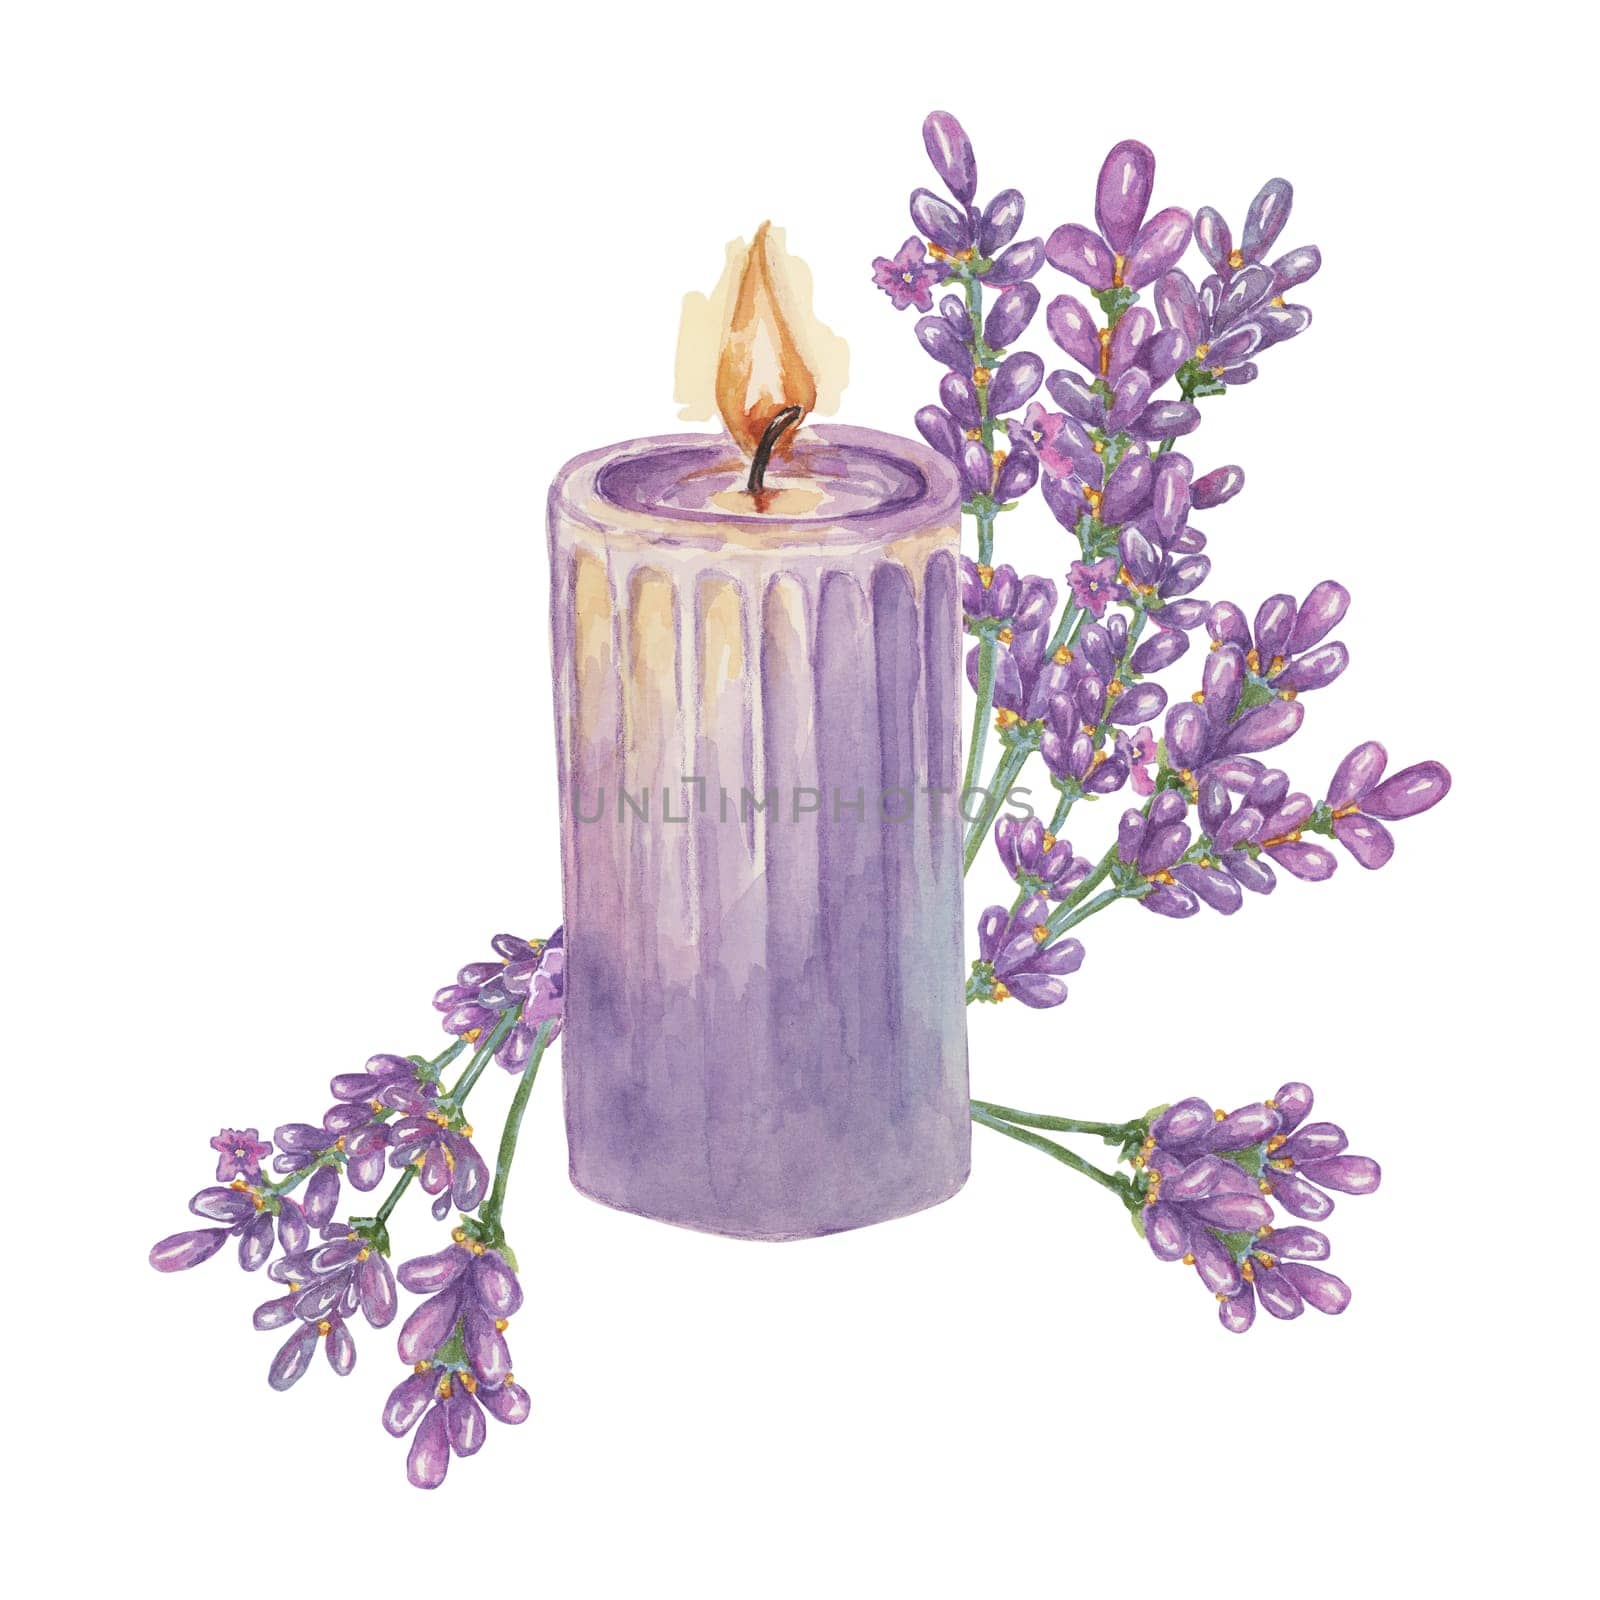 Lavender candle composition for home fragrance. Home spa aromatherapy relaxing watercolor illustration. Hand drawn clipart for beauty, cosmetics, labels, organic products, wellness and packaging